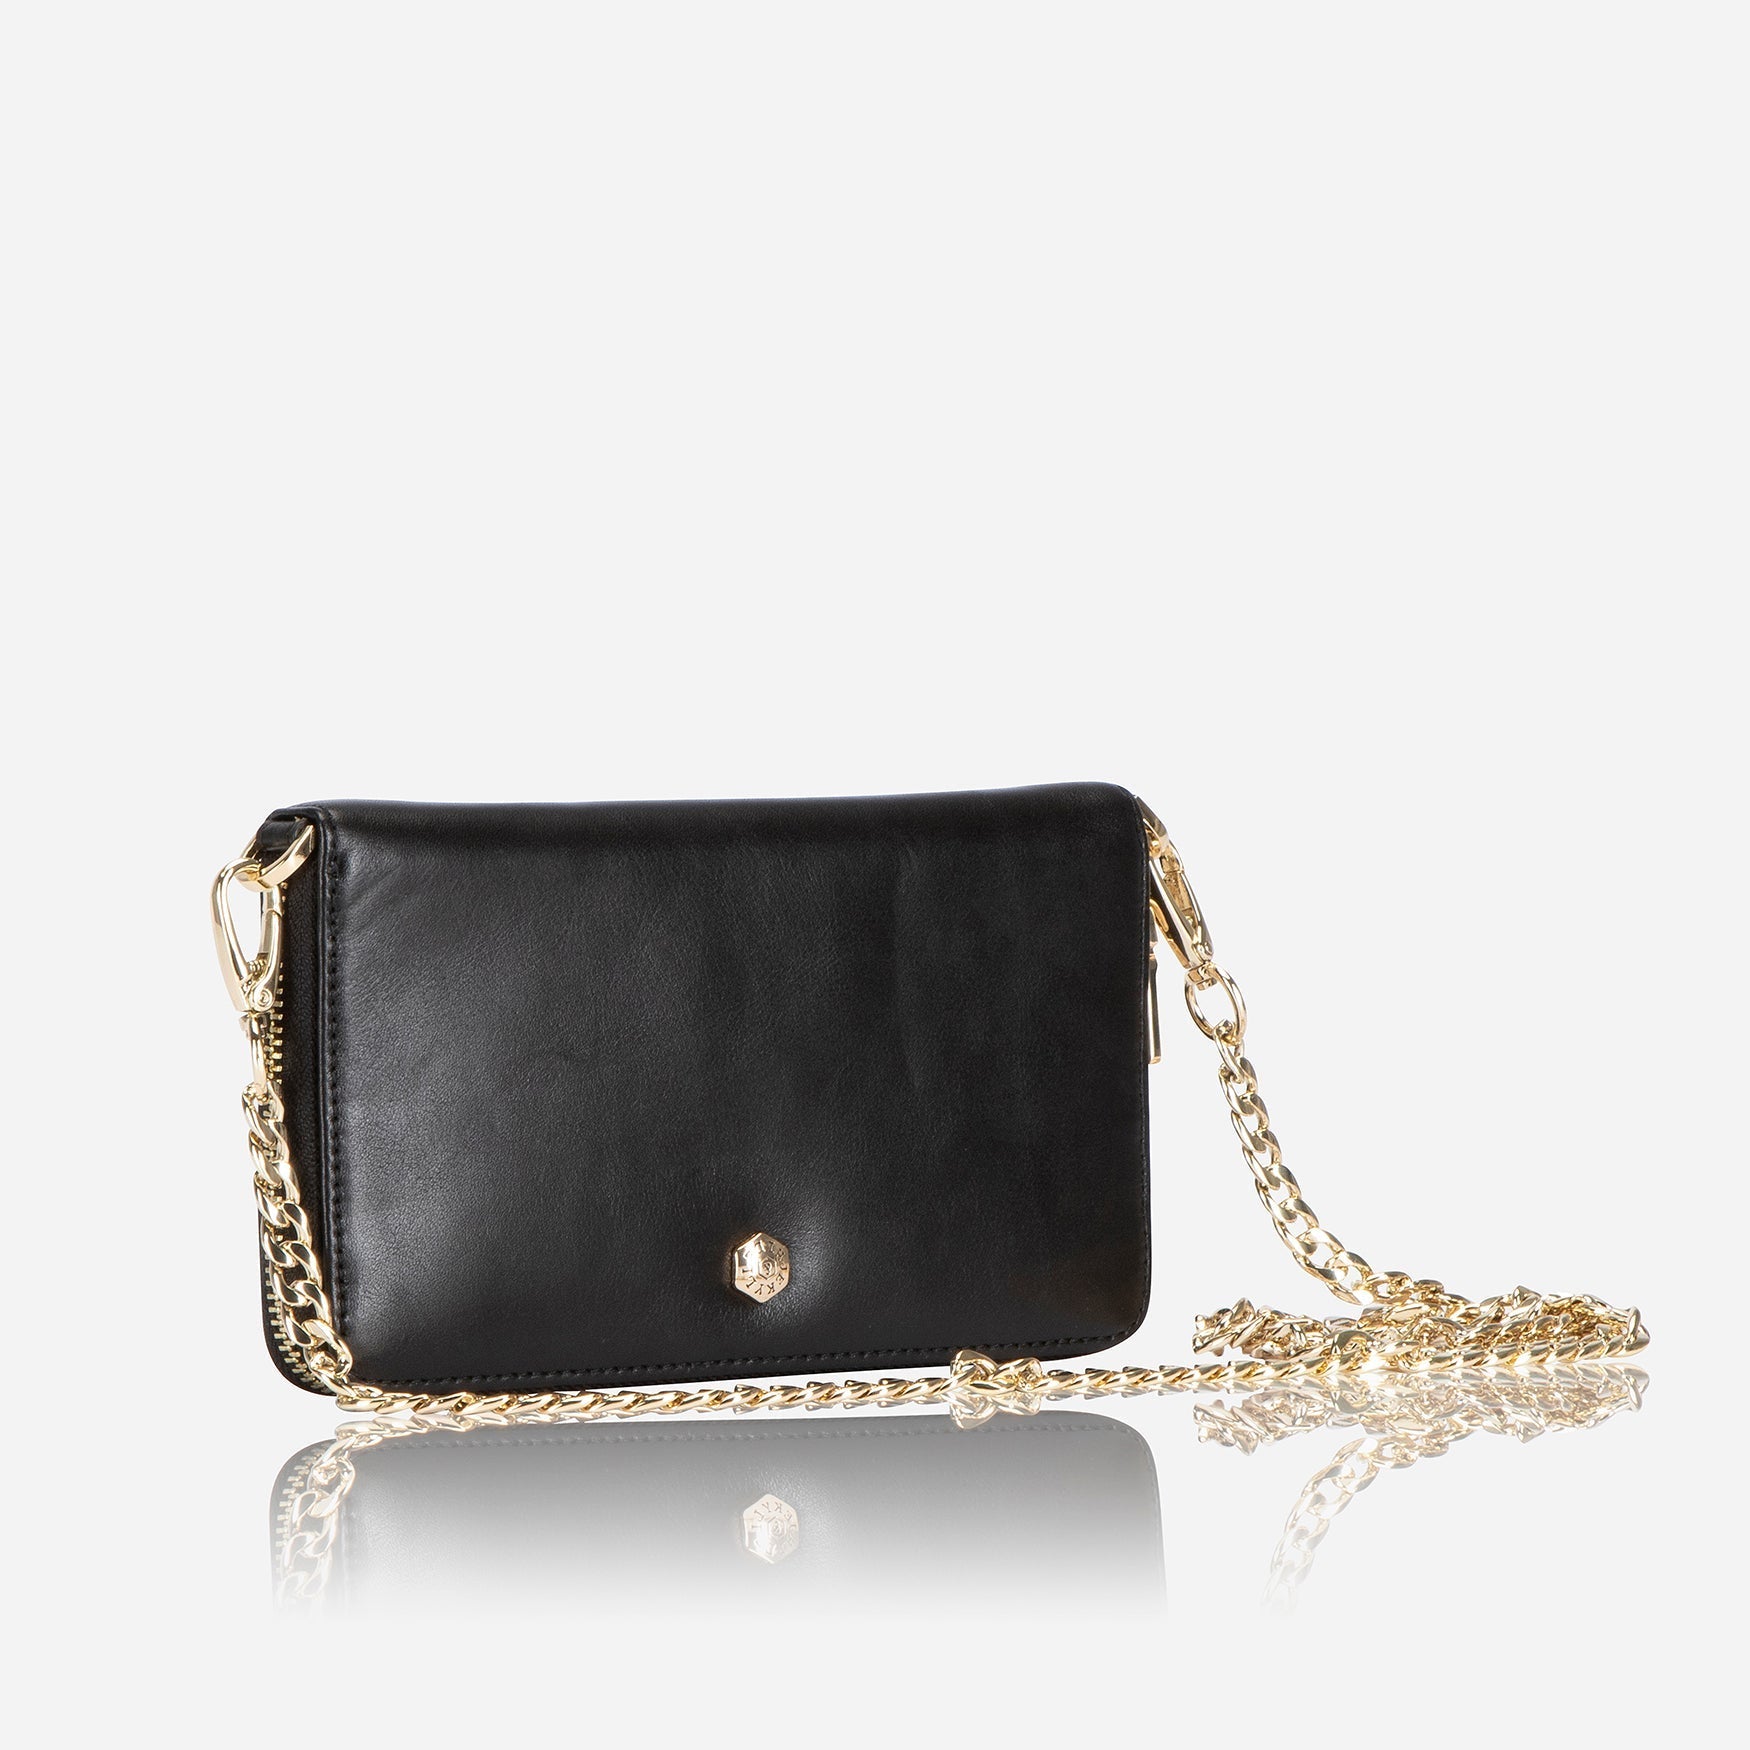 Chain Purse, Black Wallets and purses Paris    - Jekyll and Hide Australia